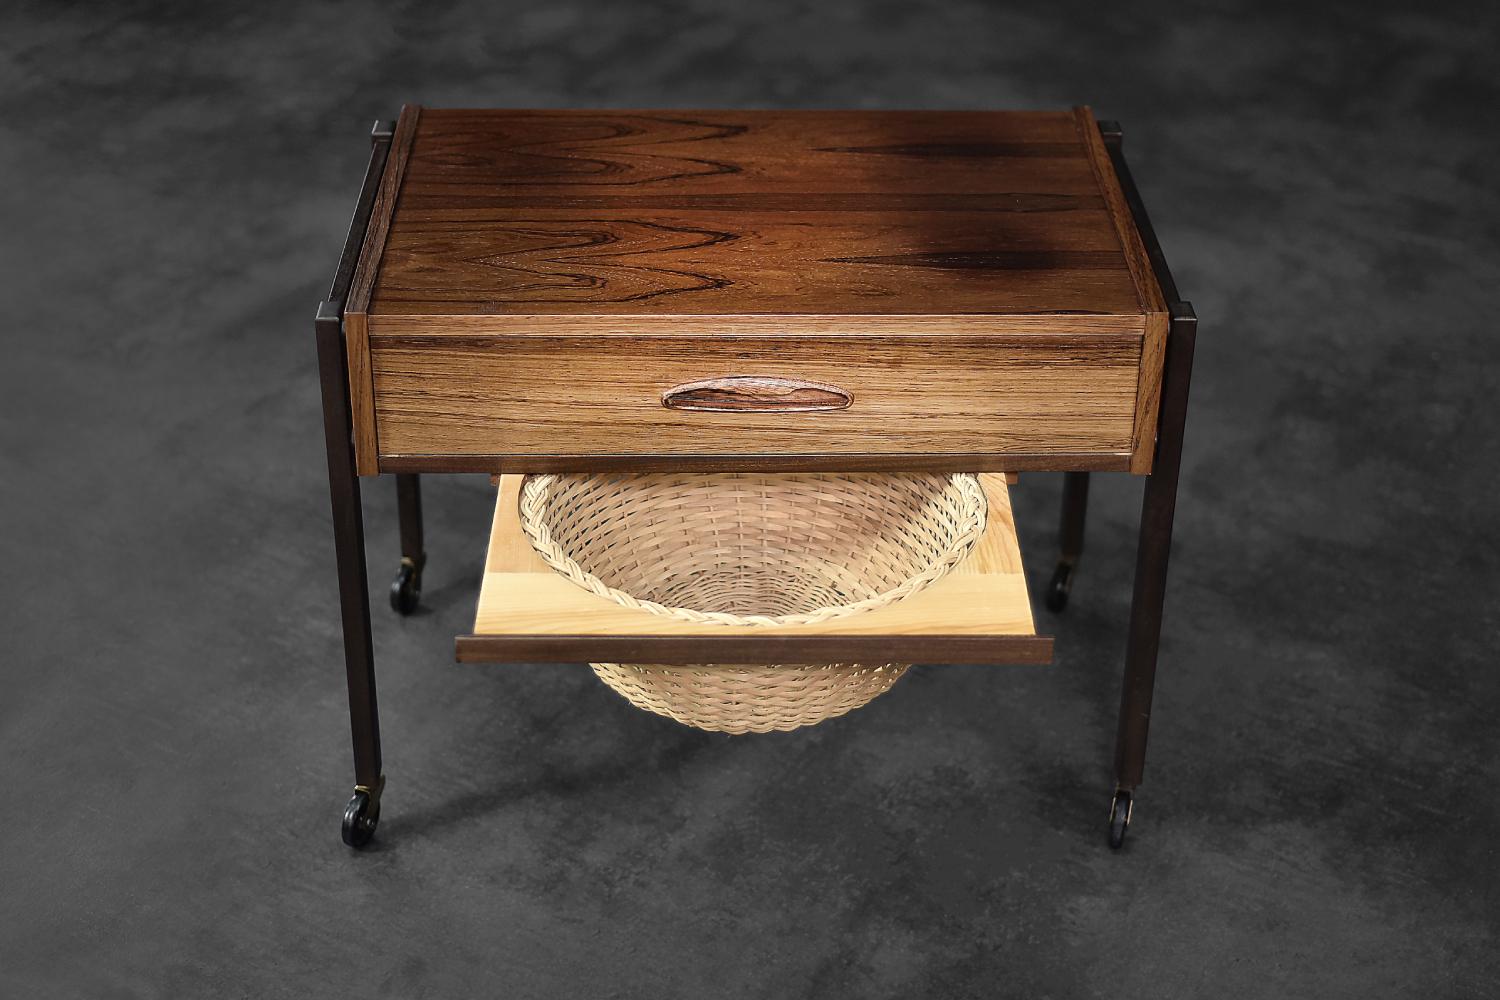 Vintage Midcentury Danish Modern Rosewood Thread Side Table with Wicker Basket For Sale 5